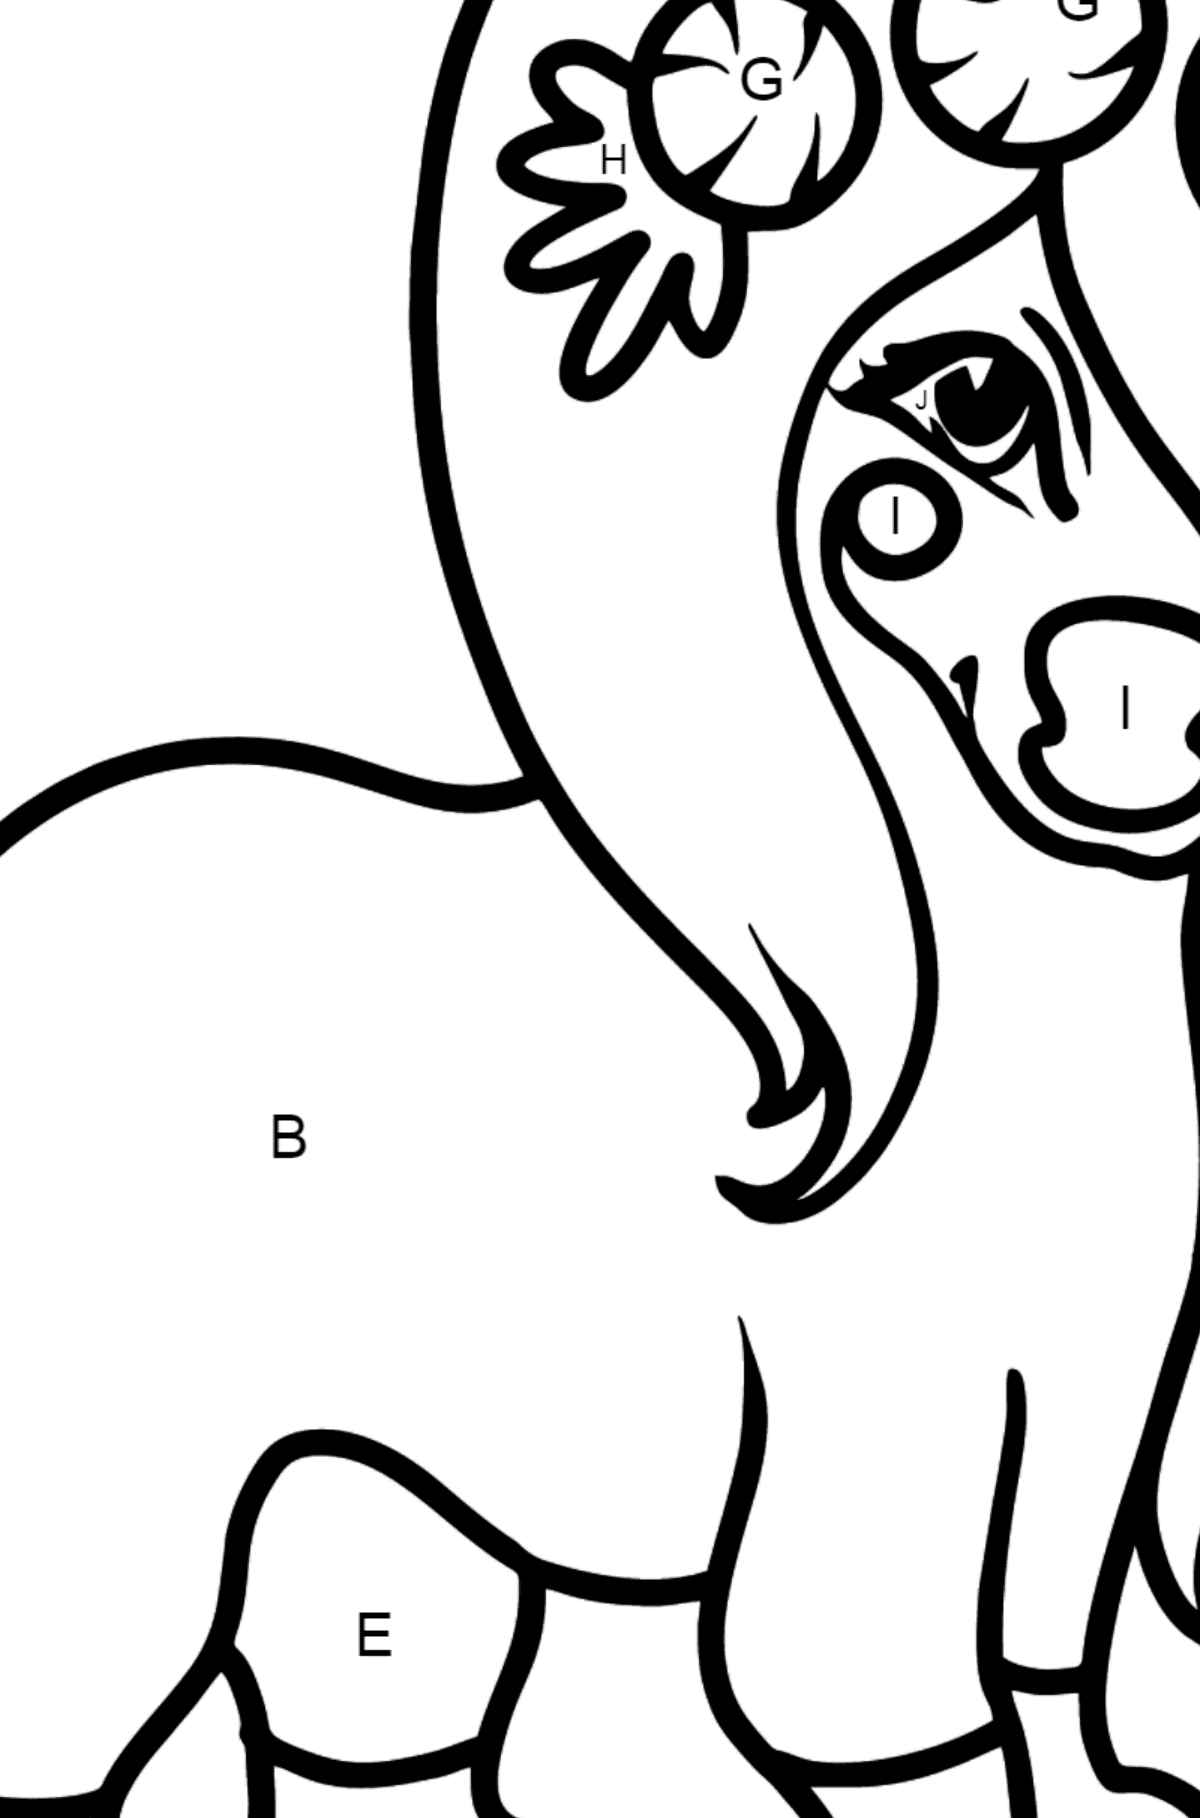 Roller Skating Pony coloring page - Coloring by Letters for Kids